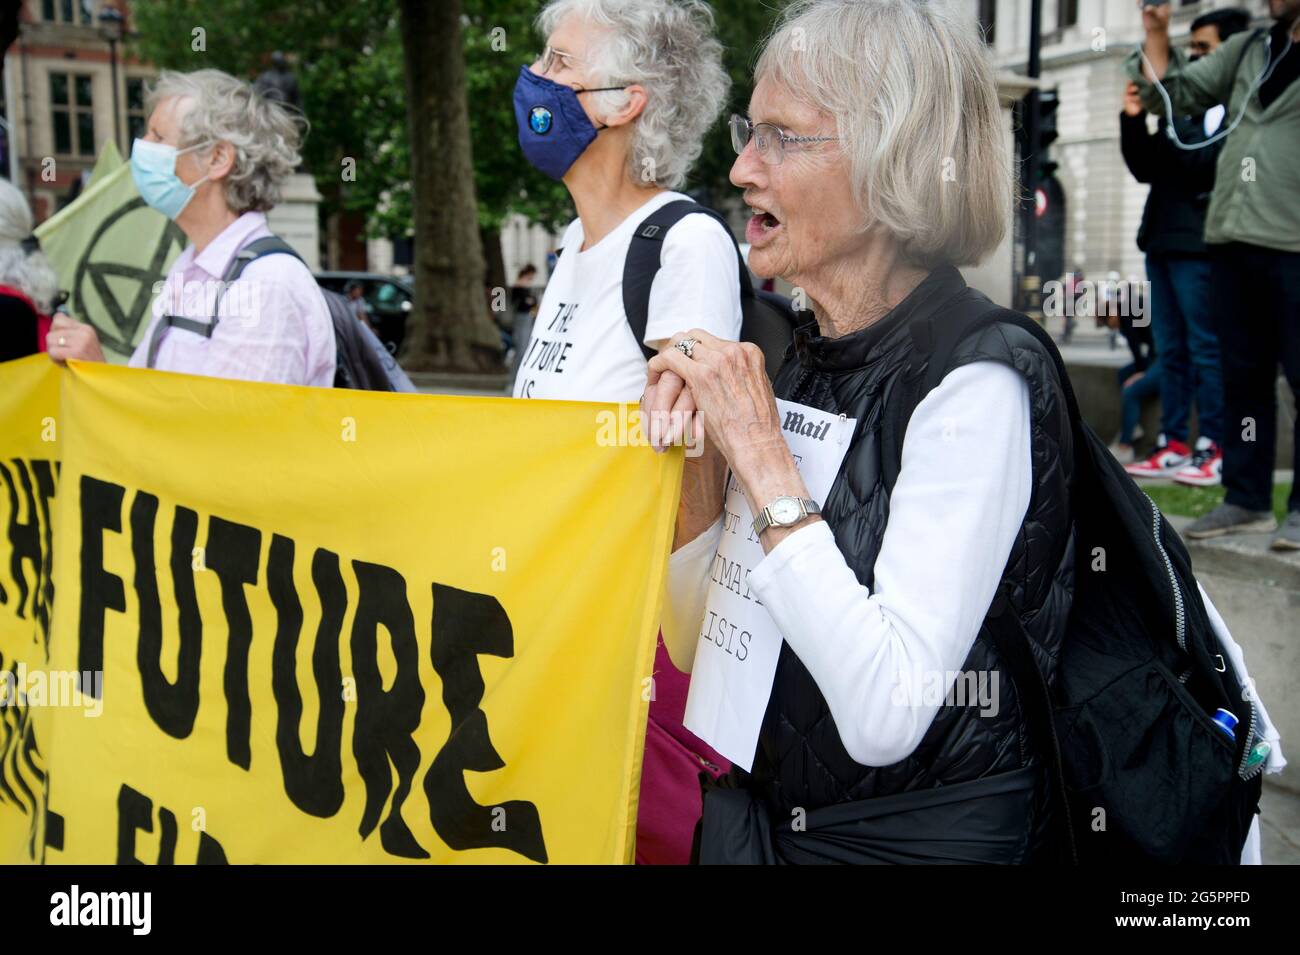 Parliament Square, London June 27th 2021. Protest organised by Extinction Rebellion urging mainstream media to tell the truth about climate change. Ol Stock Photo